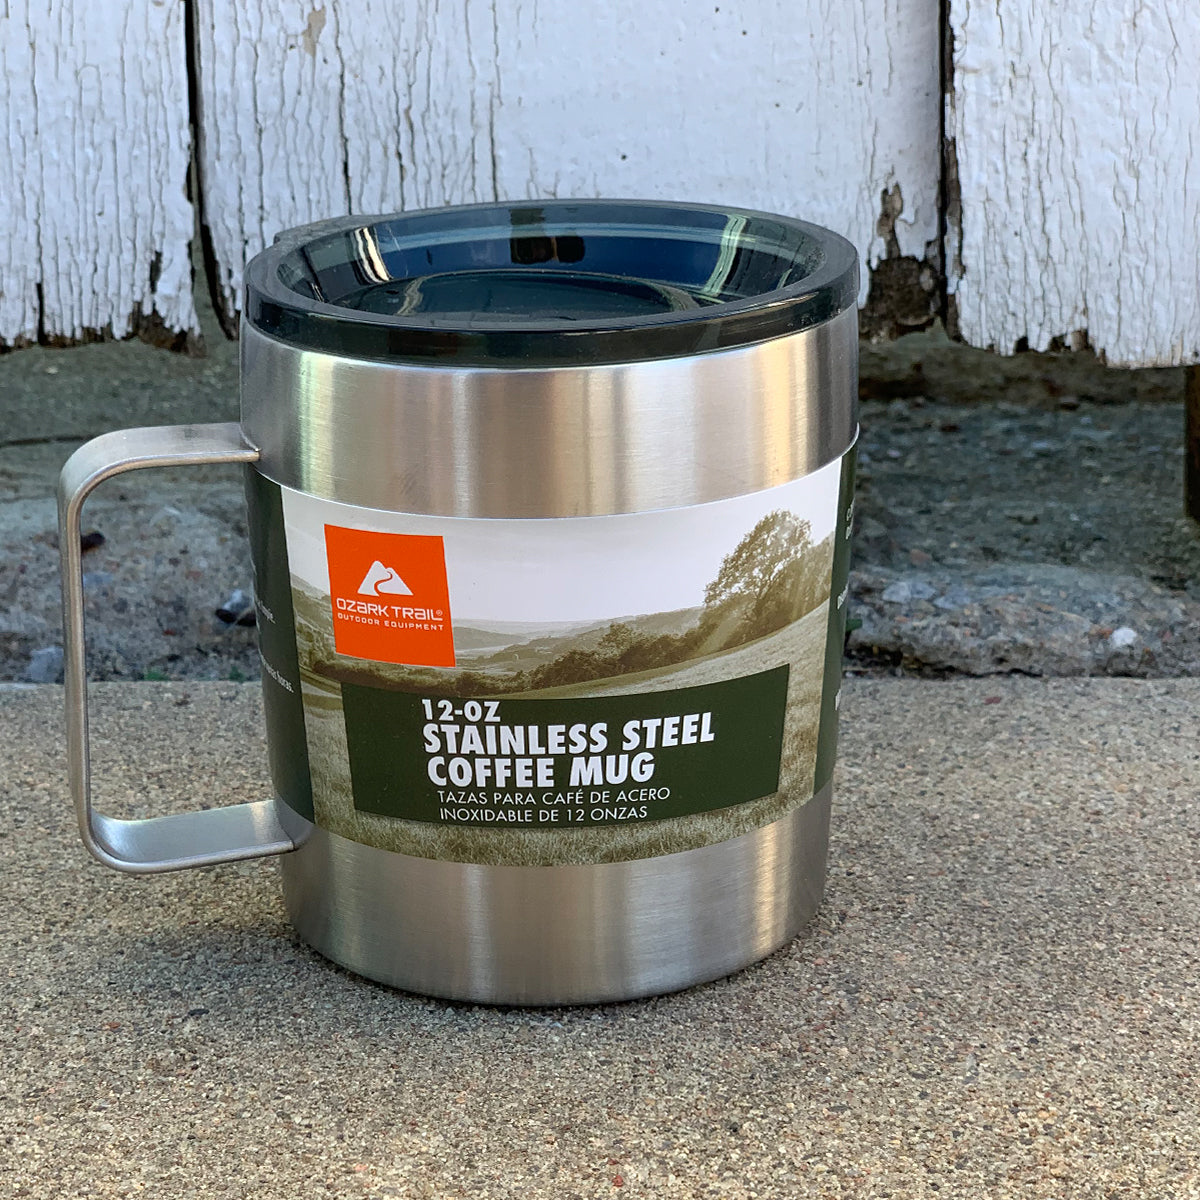 NEW 12oz Stainless Steel Coffee Mug Camping Hiking Insulated Cup Ozark Trail 